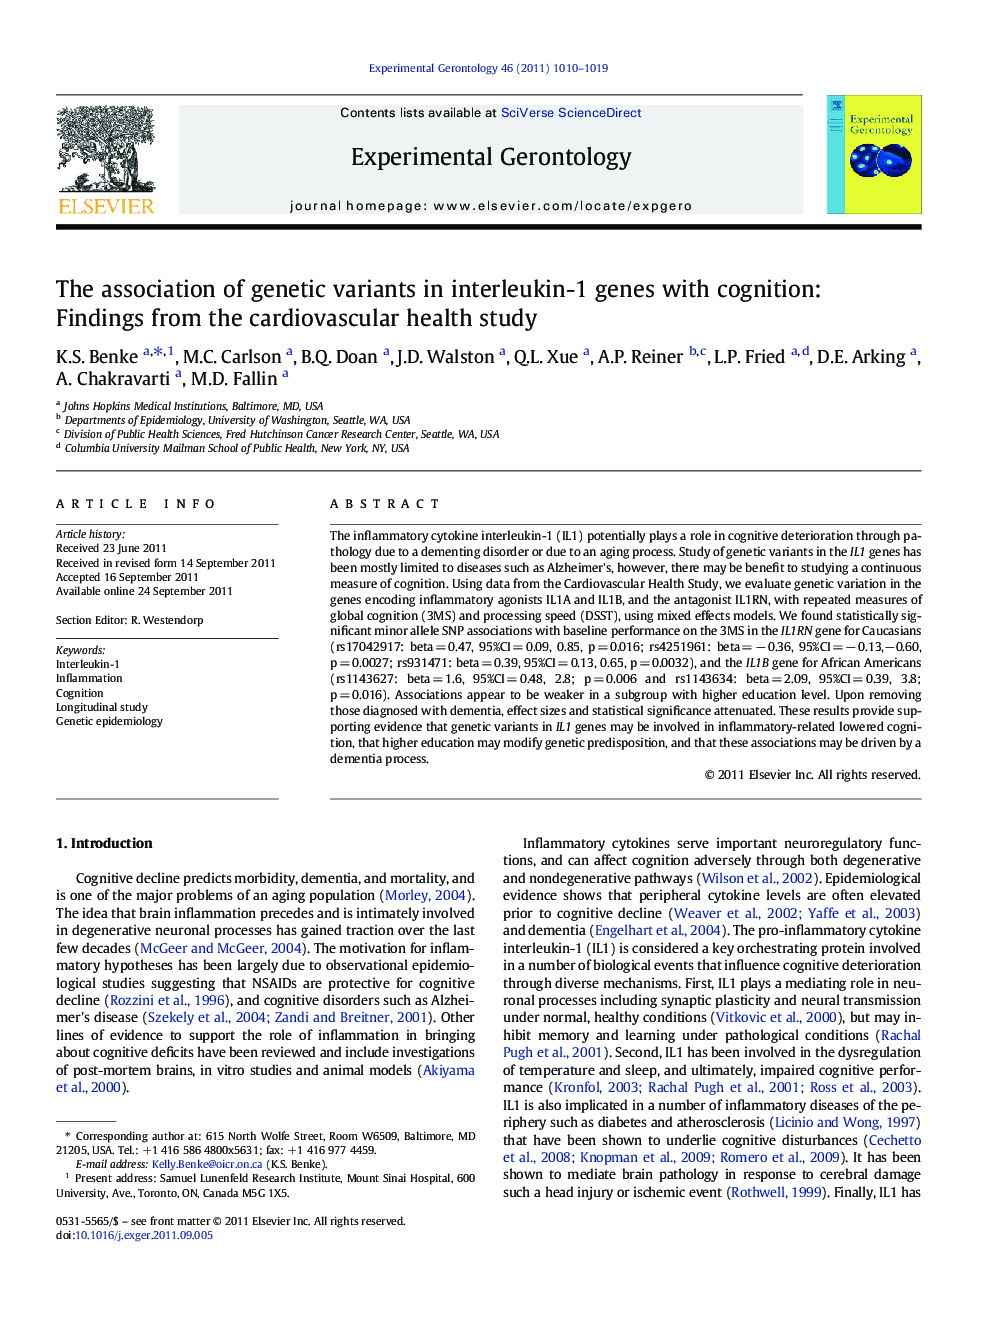 The association of genetic variants in interleukin-1 genes with cognition: Findings from the cardiovascular health study